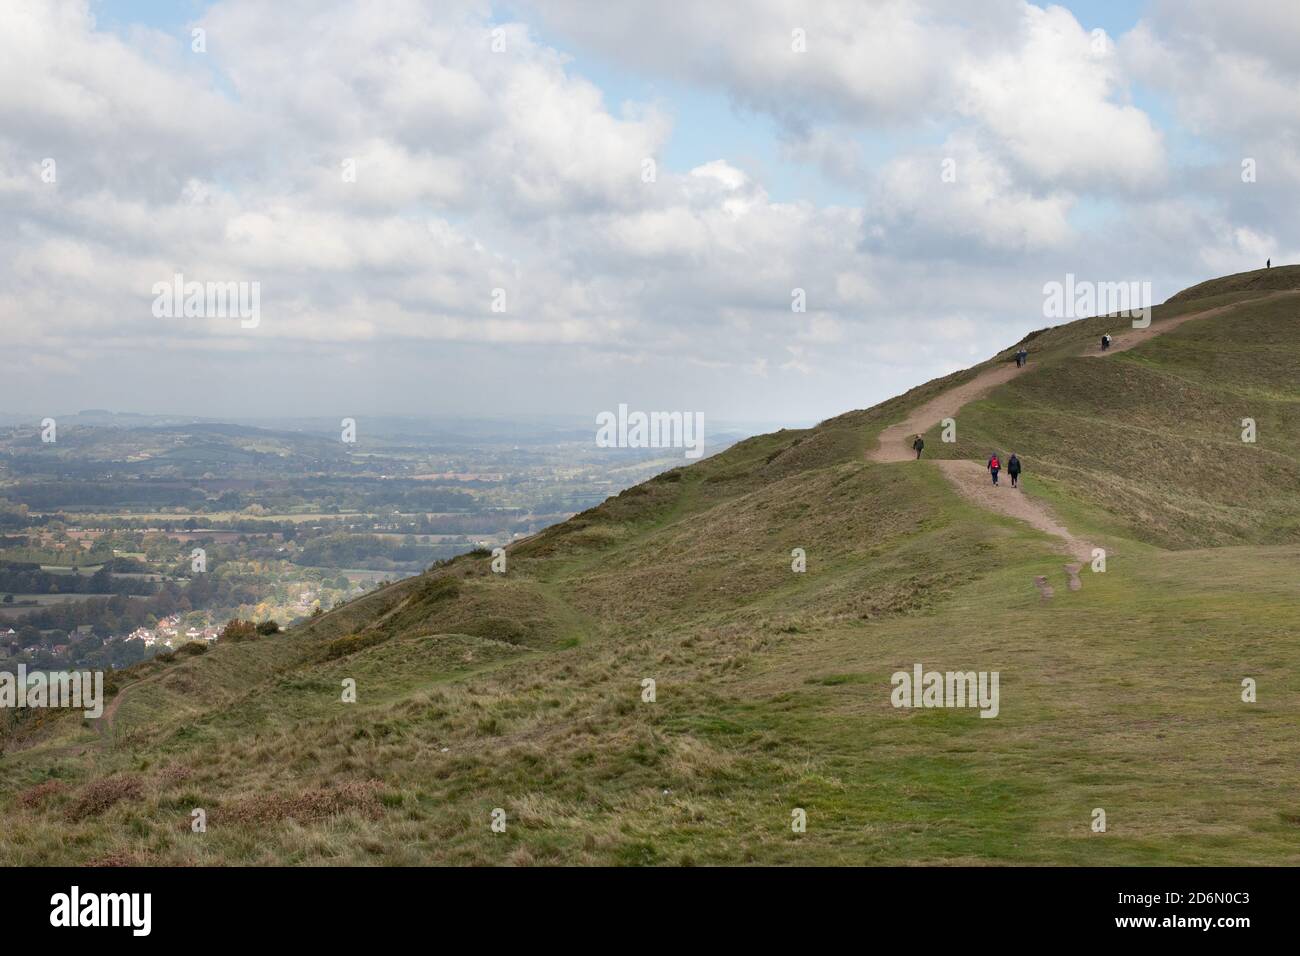 The view from British Camp Hill Fort looking towards Millennium Hill on top of the Malvern Hills. Stock Photo